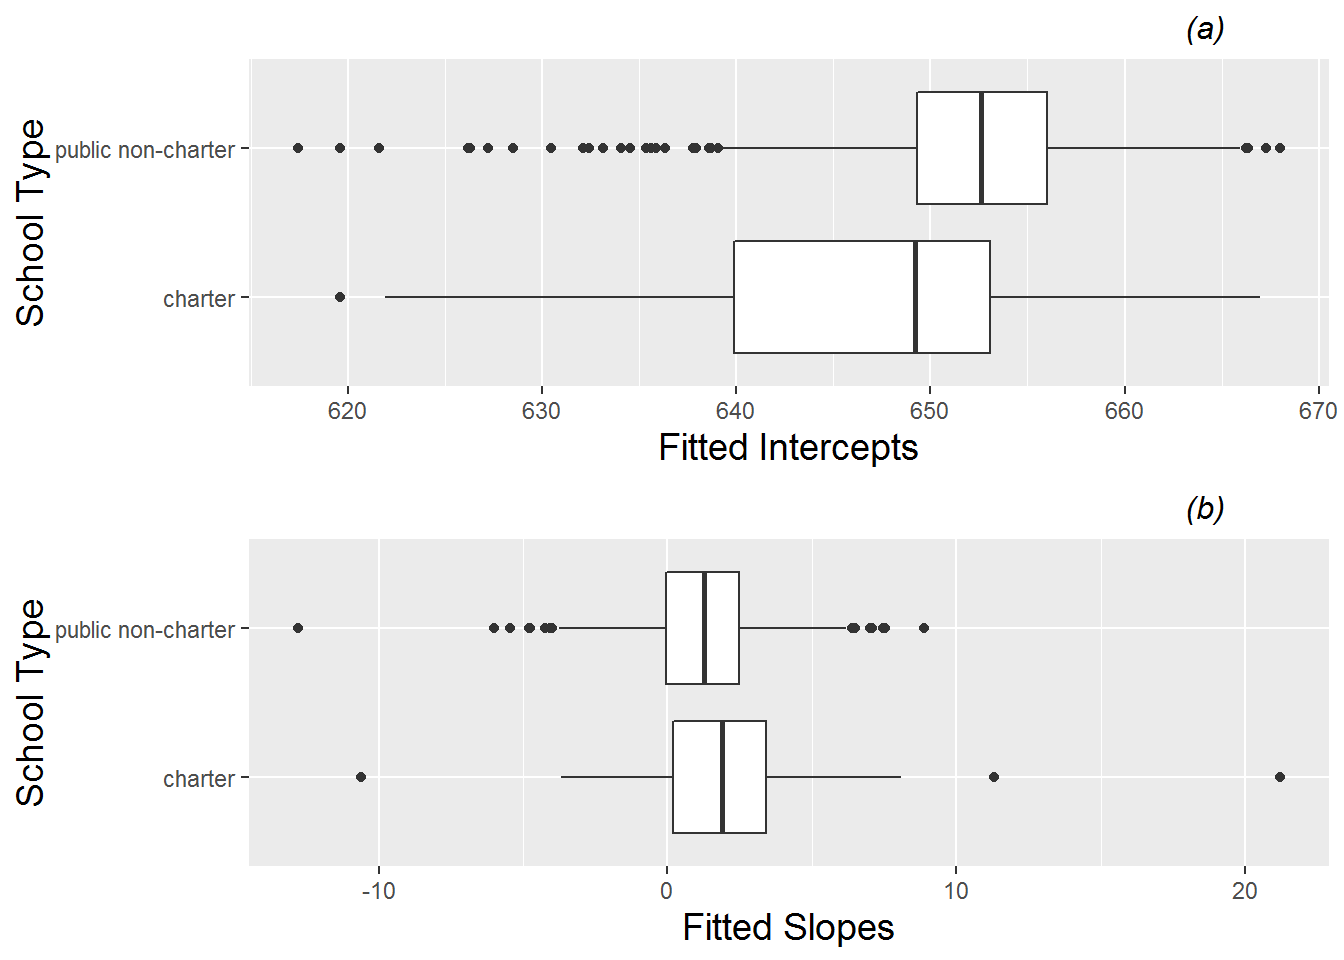 Boxplots of (a) intercepts and (b) slopes by school type (charter vs. public non-charter).